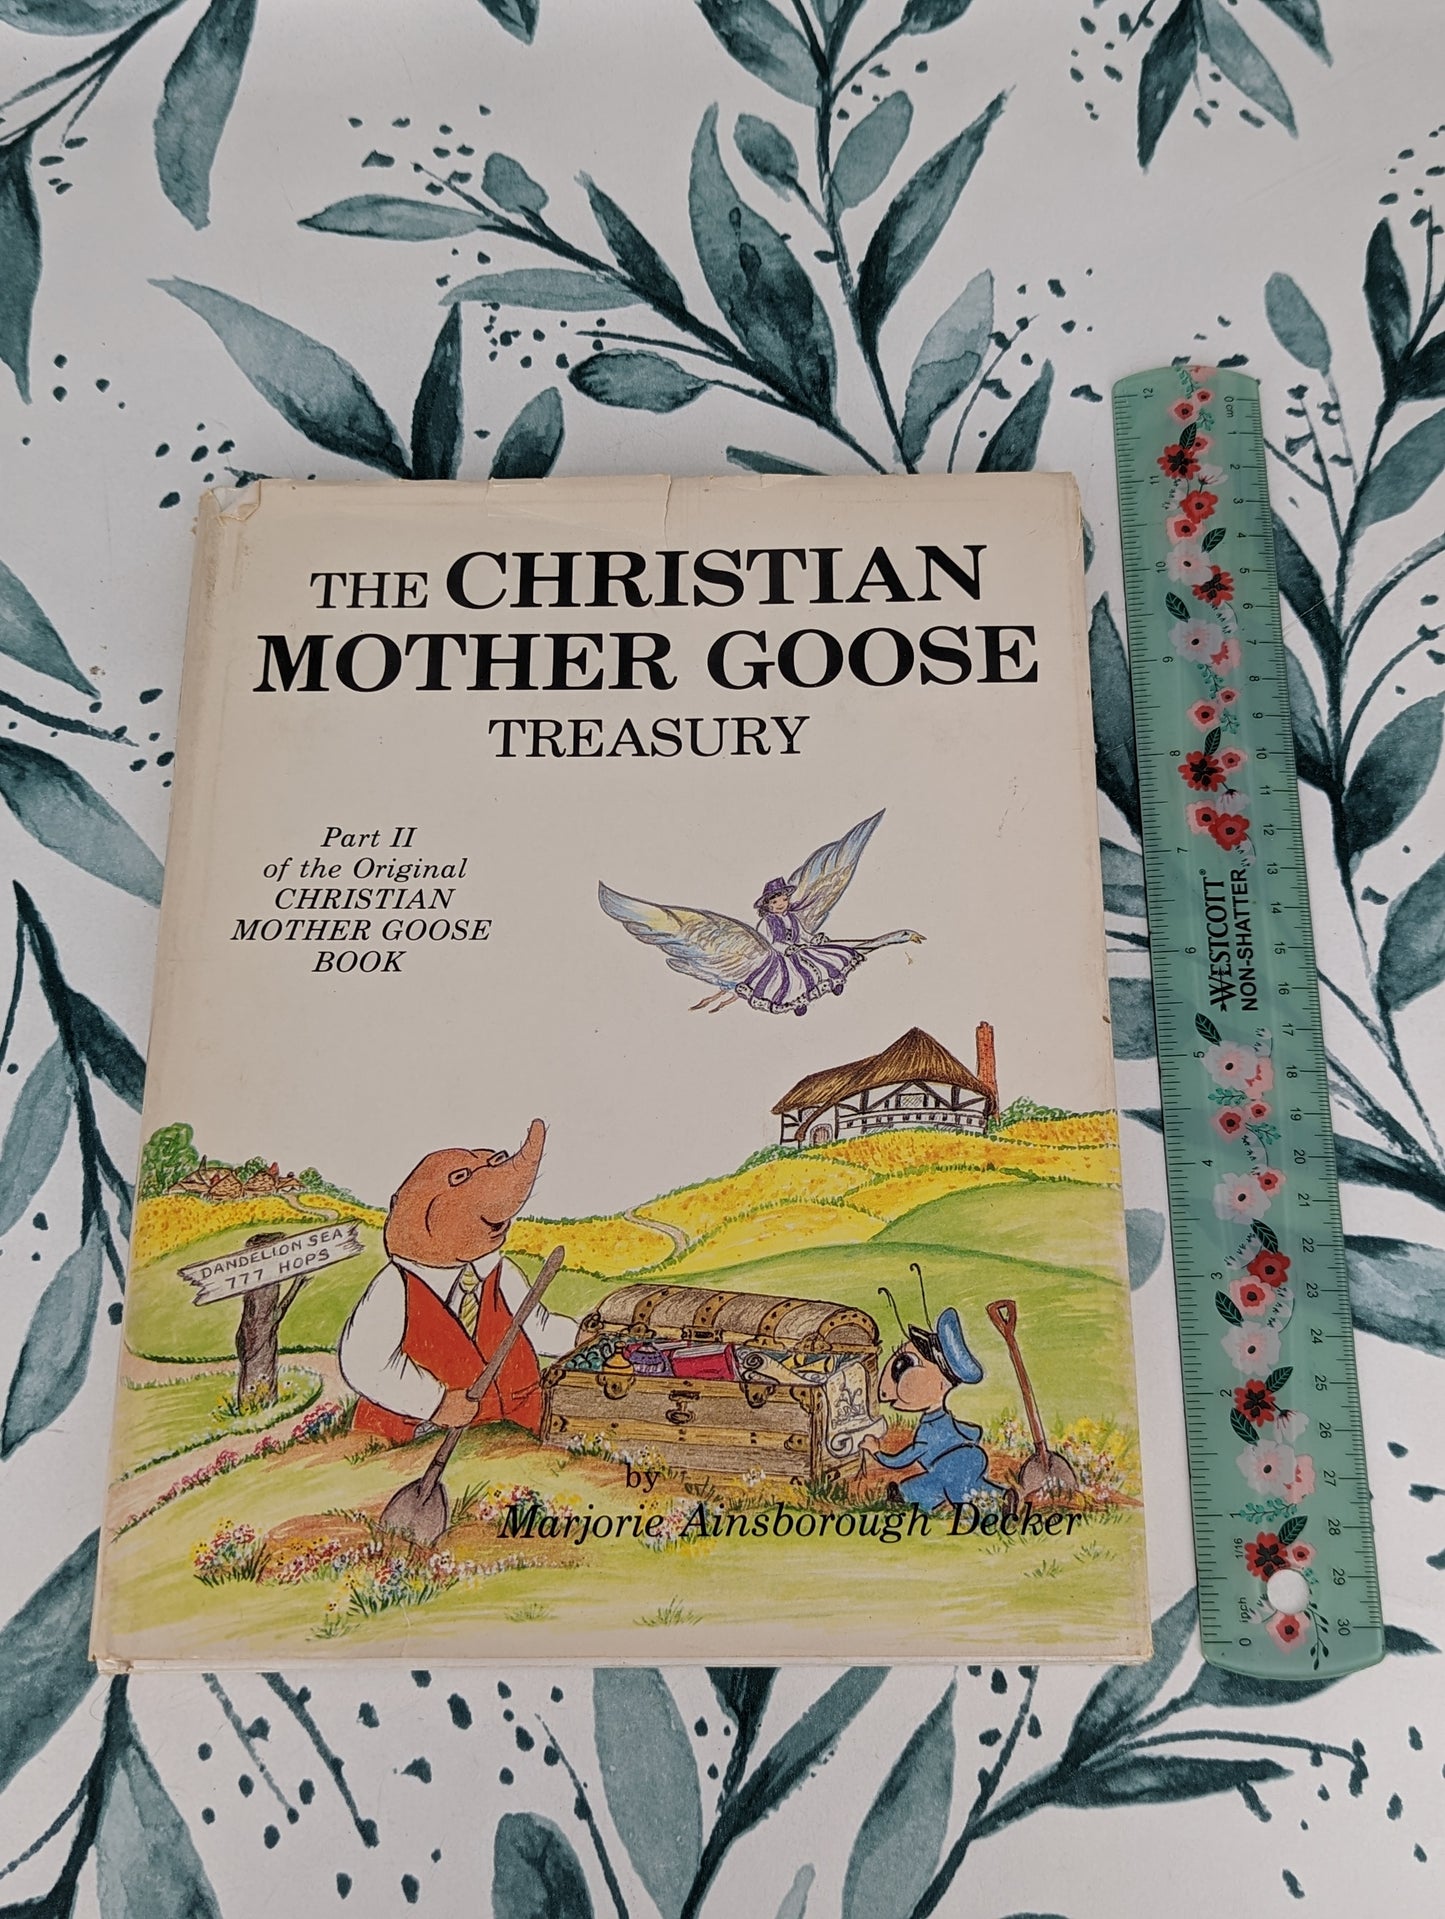 The Christian Mother Goose Treasury (Part II) - First edition, SIGNED BY AUTHOR